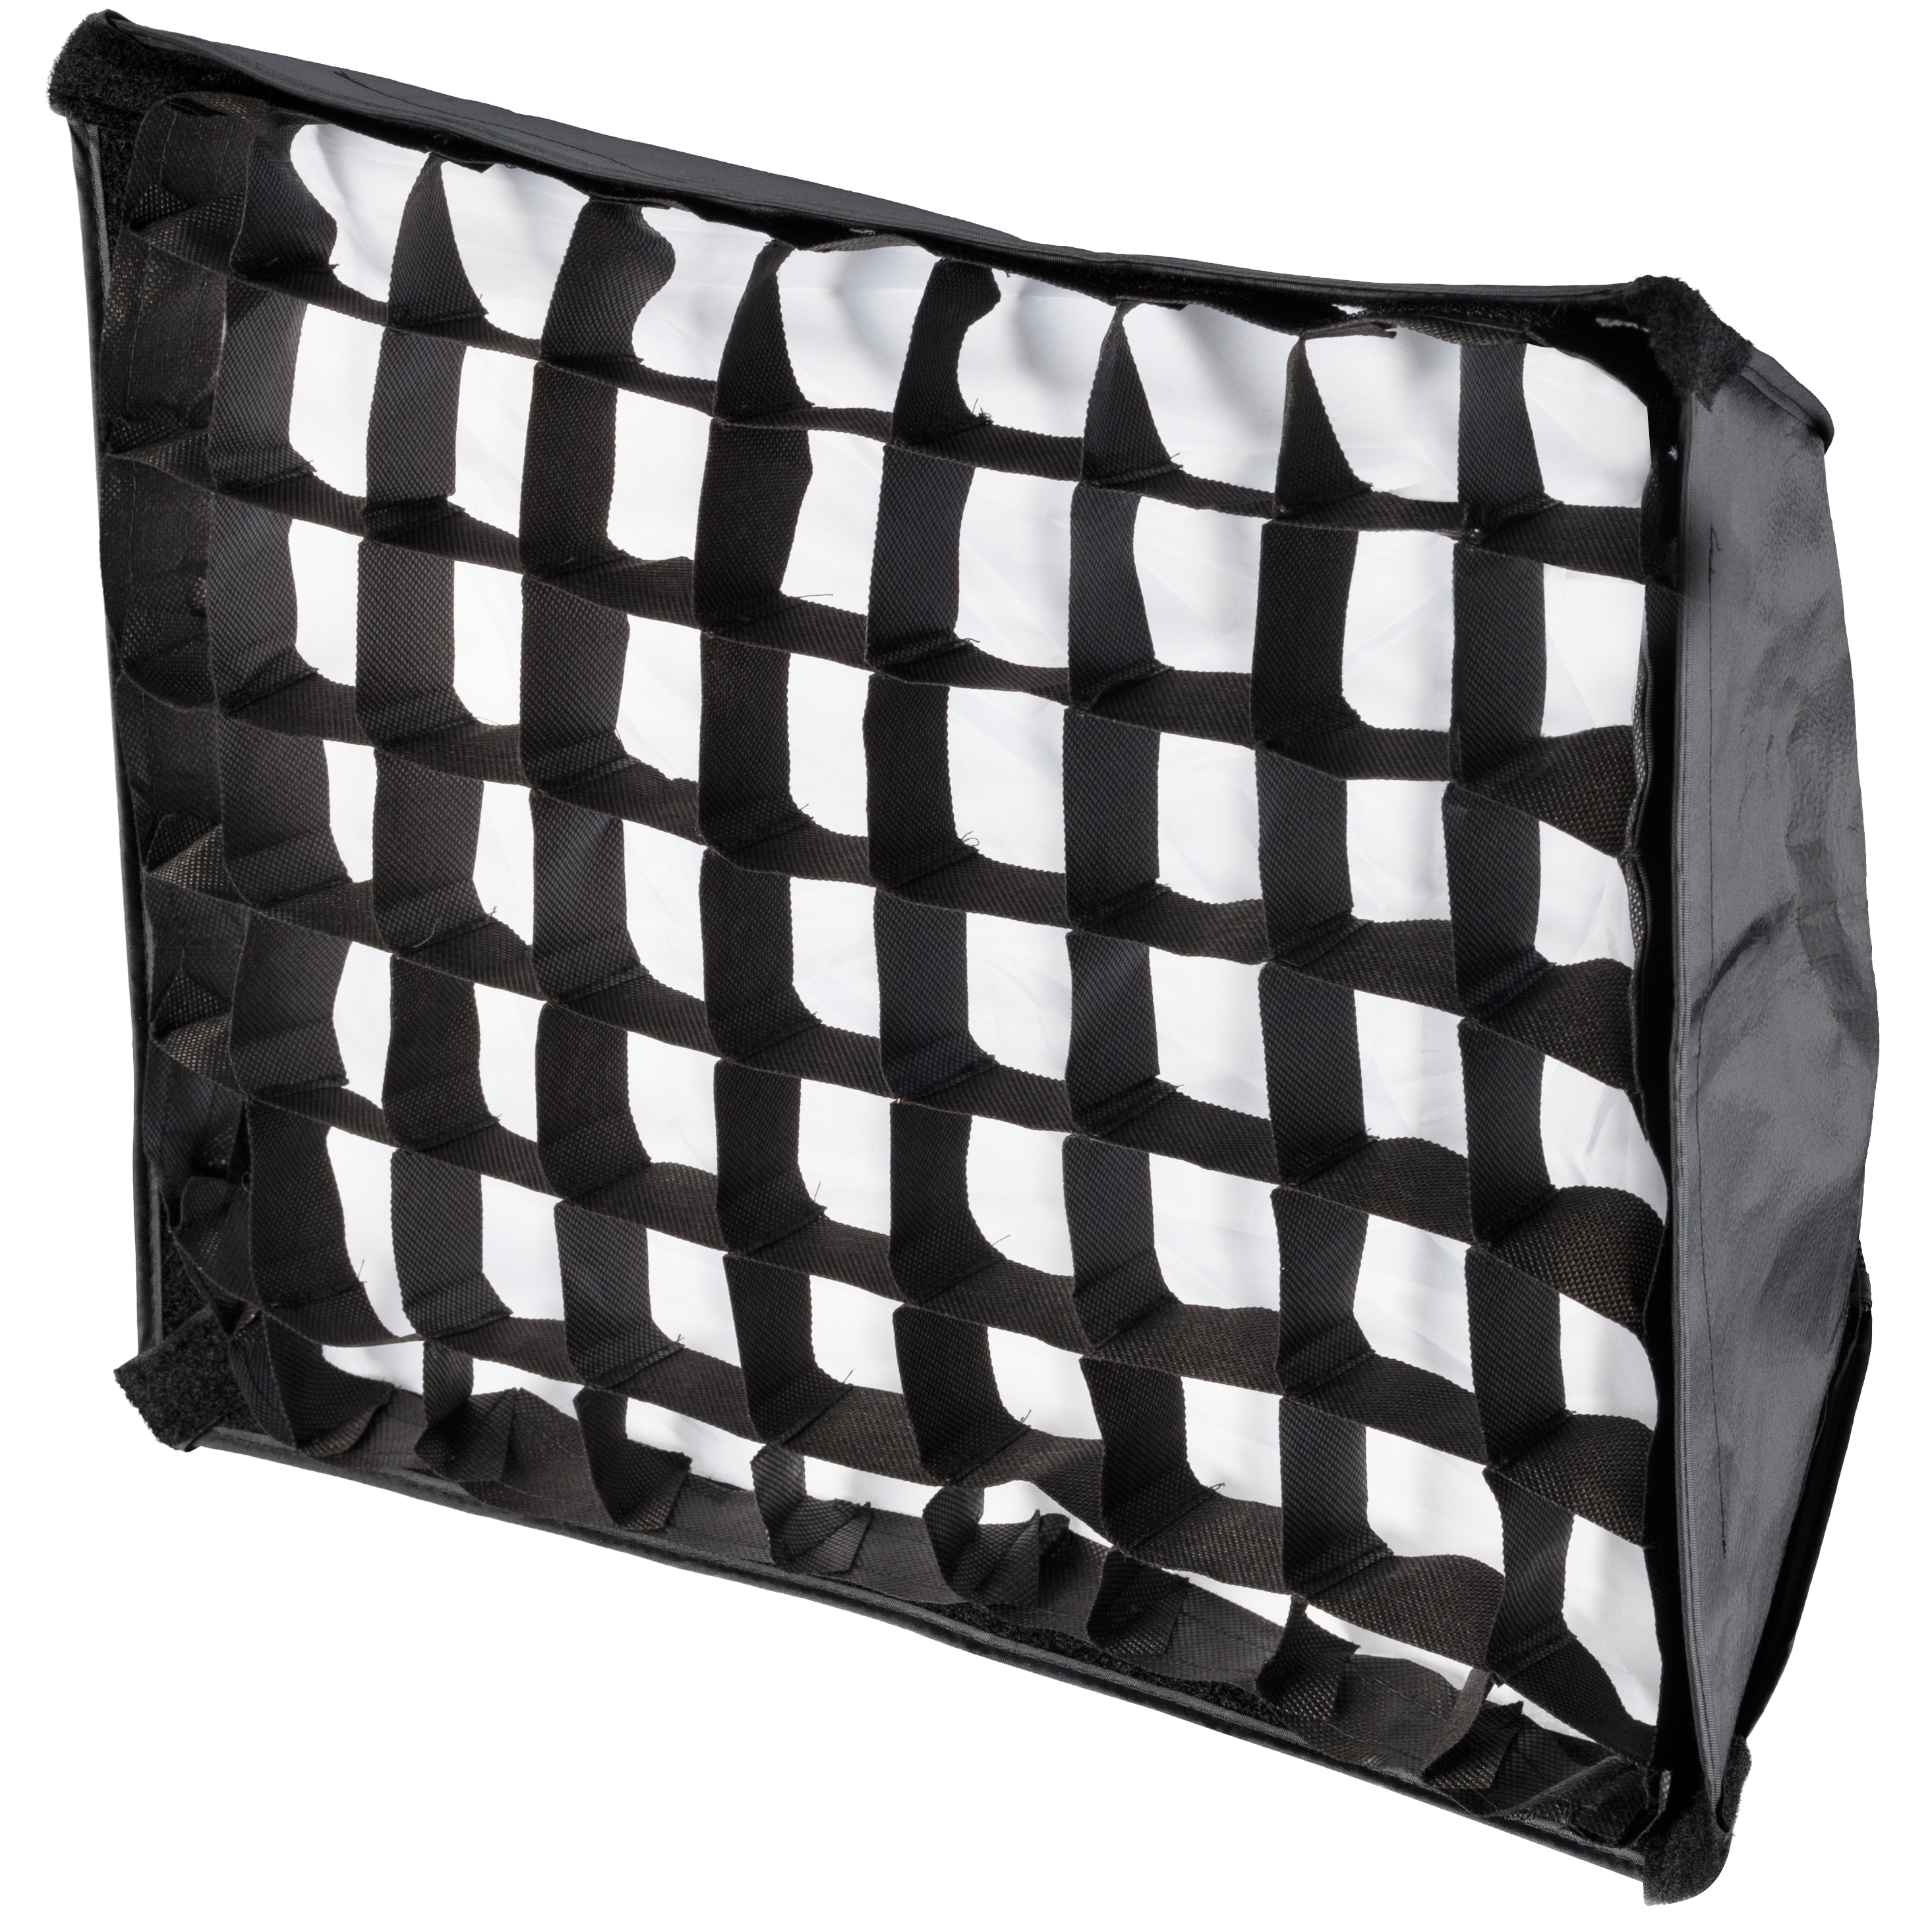 BRESSER Softbox and Honeycomb Grid for BR-S36B PRO Bi-Colour LED Panel Lamp 36W